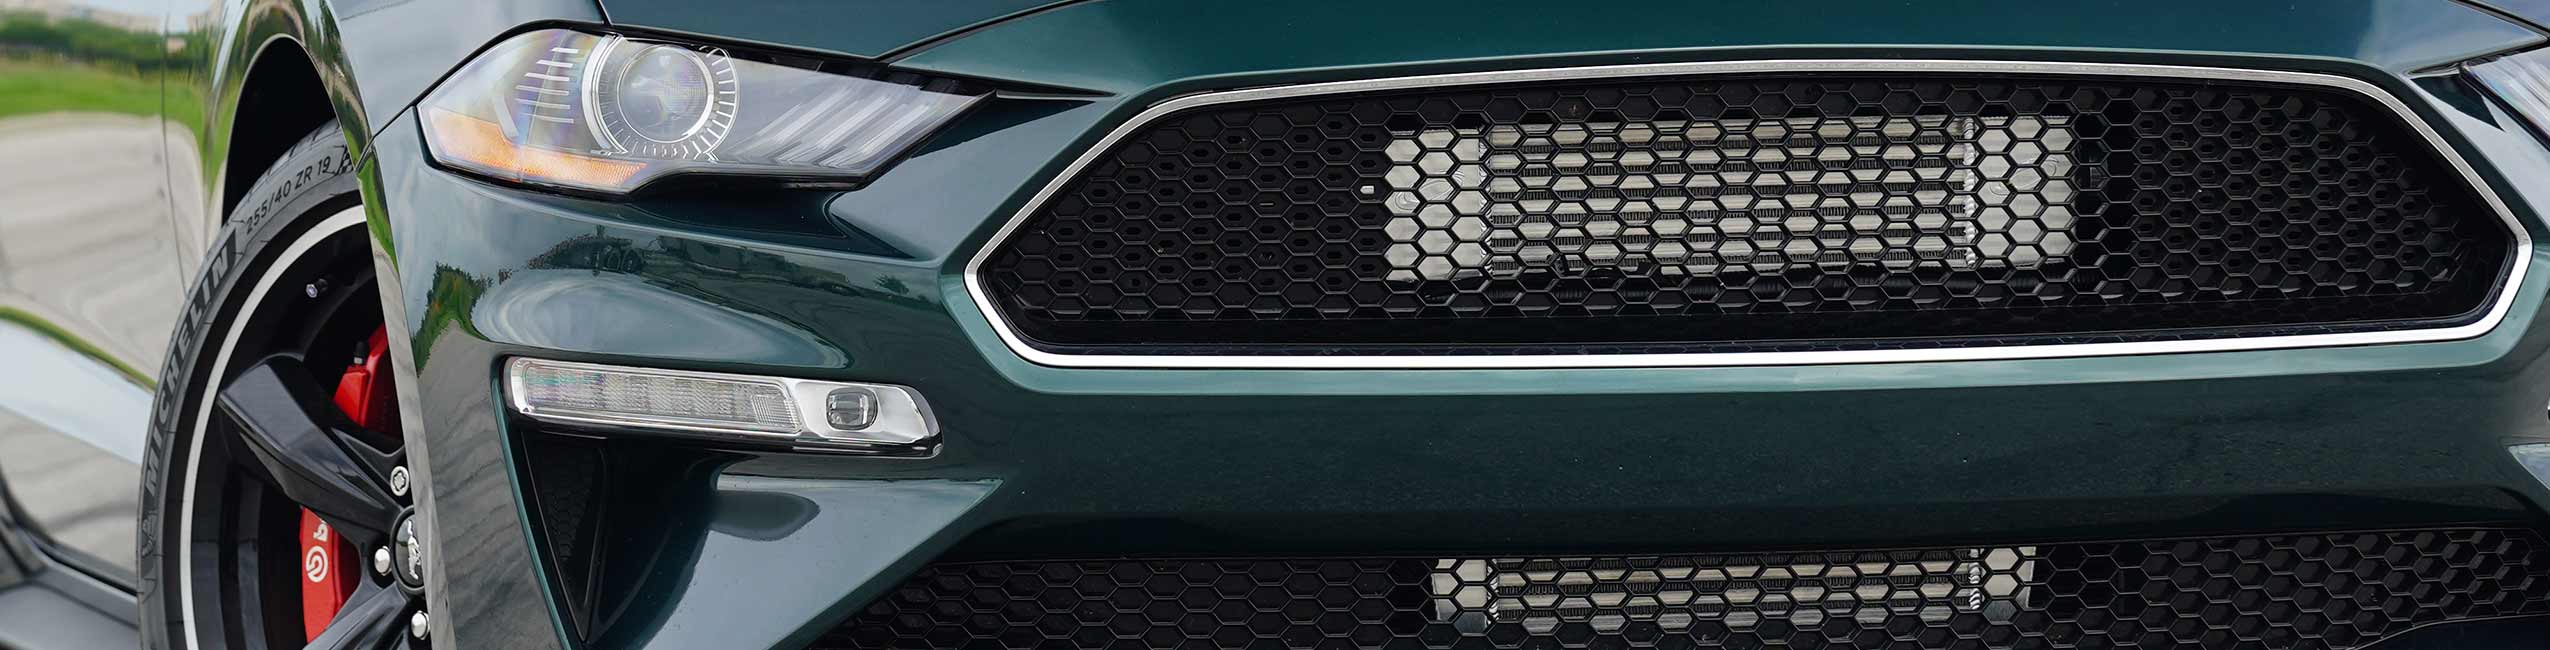 2020-2019 MUSTANG BULLITT PROCHARGER SUPERCHARGER SYSTEMS AND KITS